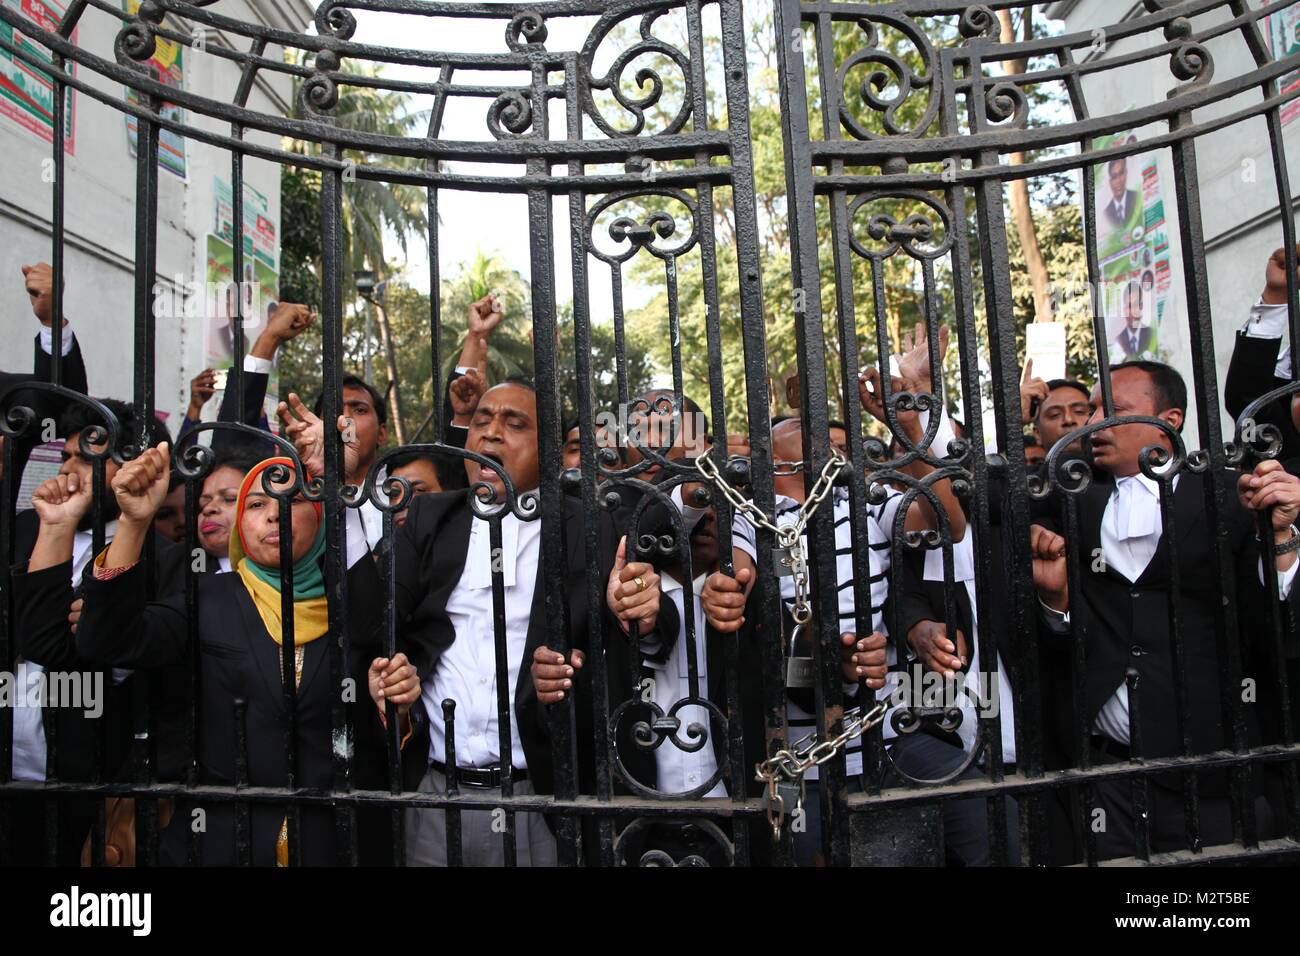 Dhaka, Bangladesh. 8th Feb, 2018. February 08, 2018 Dhaka, Bangladesh - Bangladesh National Party (BNP) lawyers supporter stand inside a locked gate at High Court after the former prime minister and BNP chairperson Khaleda Zia sentenced to five years in prison, in Dhaka, Bangladesh 08 February 2018. BNP leader Khaleda Zia sentenced to five years in prison after a court found her guilty in a corruption case. According to complainant, a grant of 1,255,000 US dollars was transferred from the United Saudi Commercial Bank to the Prime Minister's Orphanage Fund. The then premier Khaleda created Stock Photo